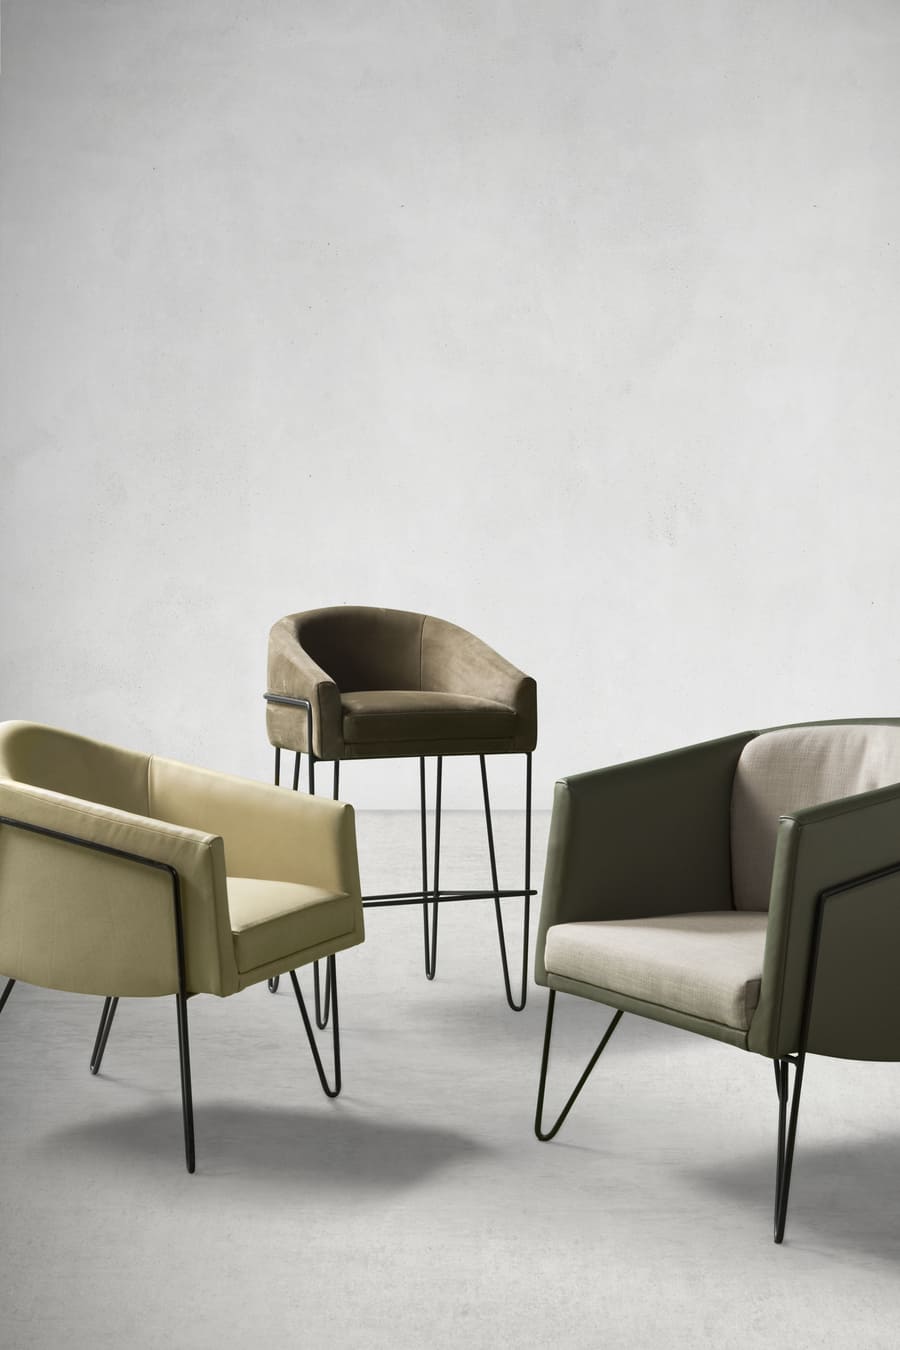 chairs Exclusive Interview With Dieter Cartwright From Dutch East Design